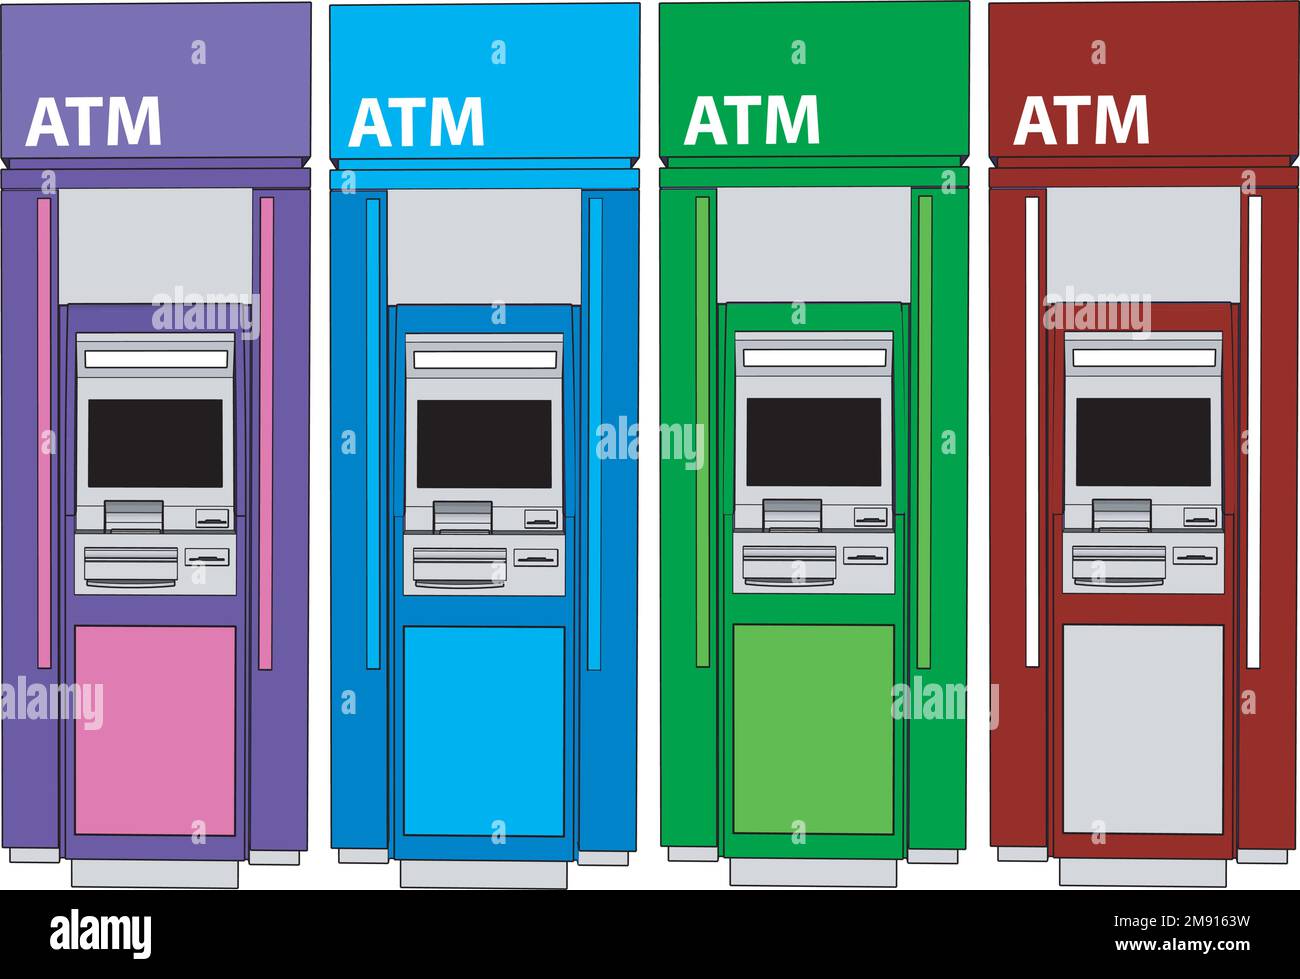 ATM bank cash machine on white background. Set of ATM machines from different sides. Isolated vector illustration Stock Vector